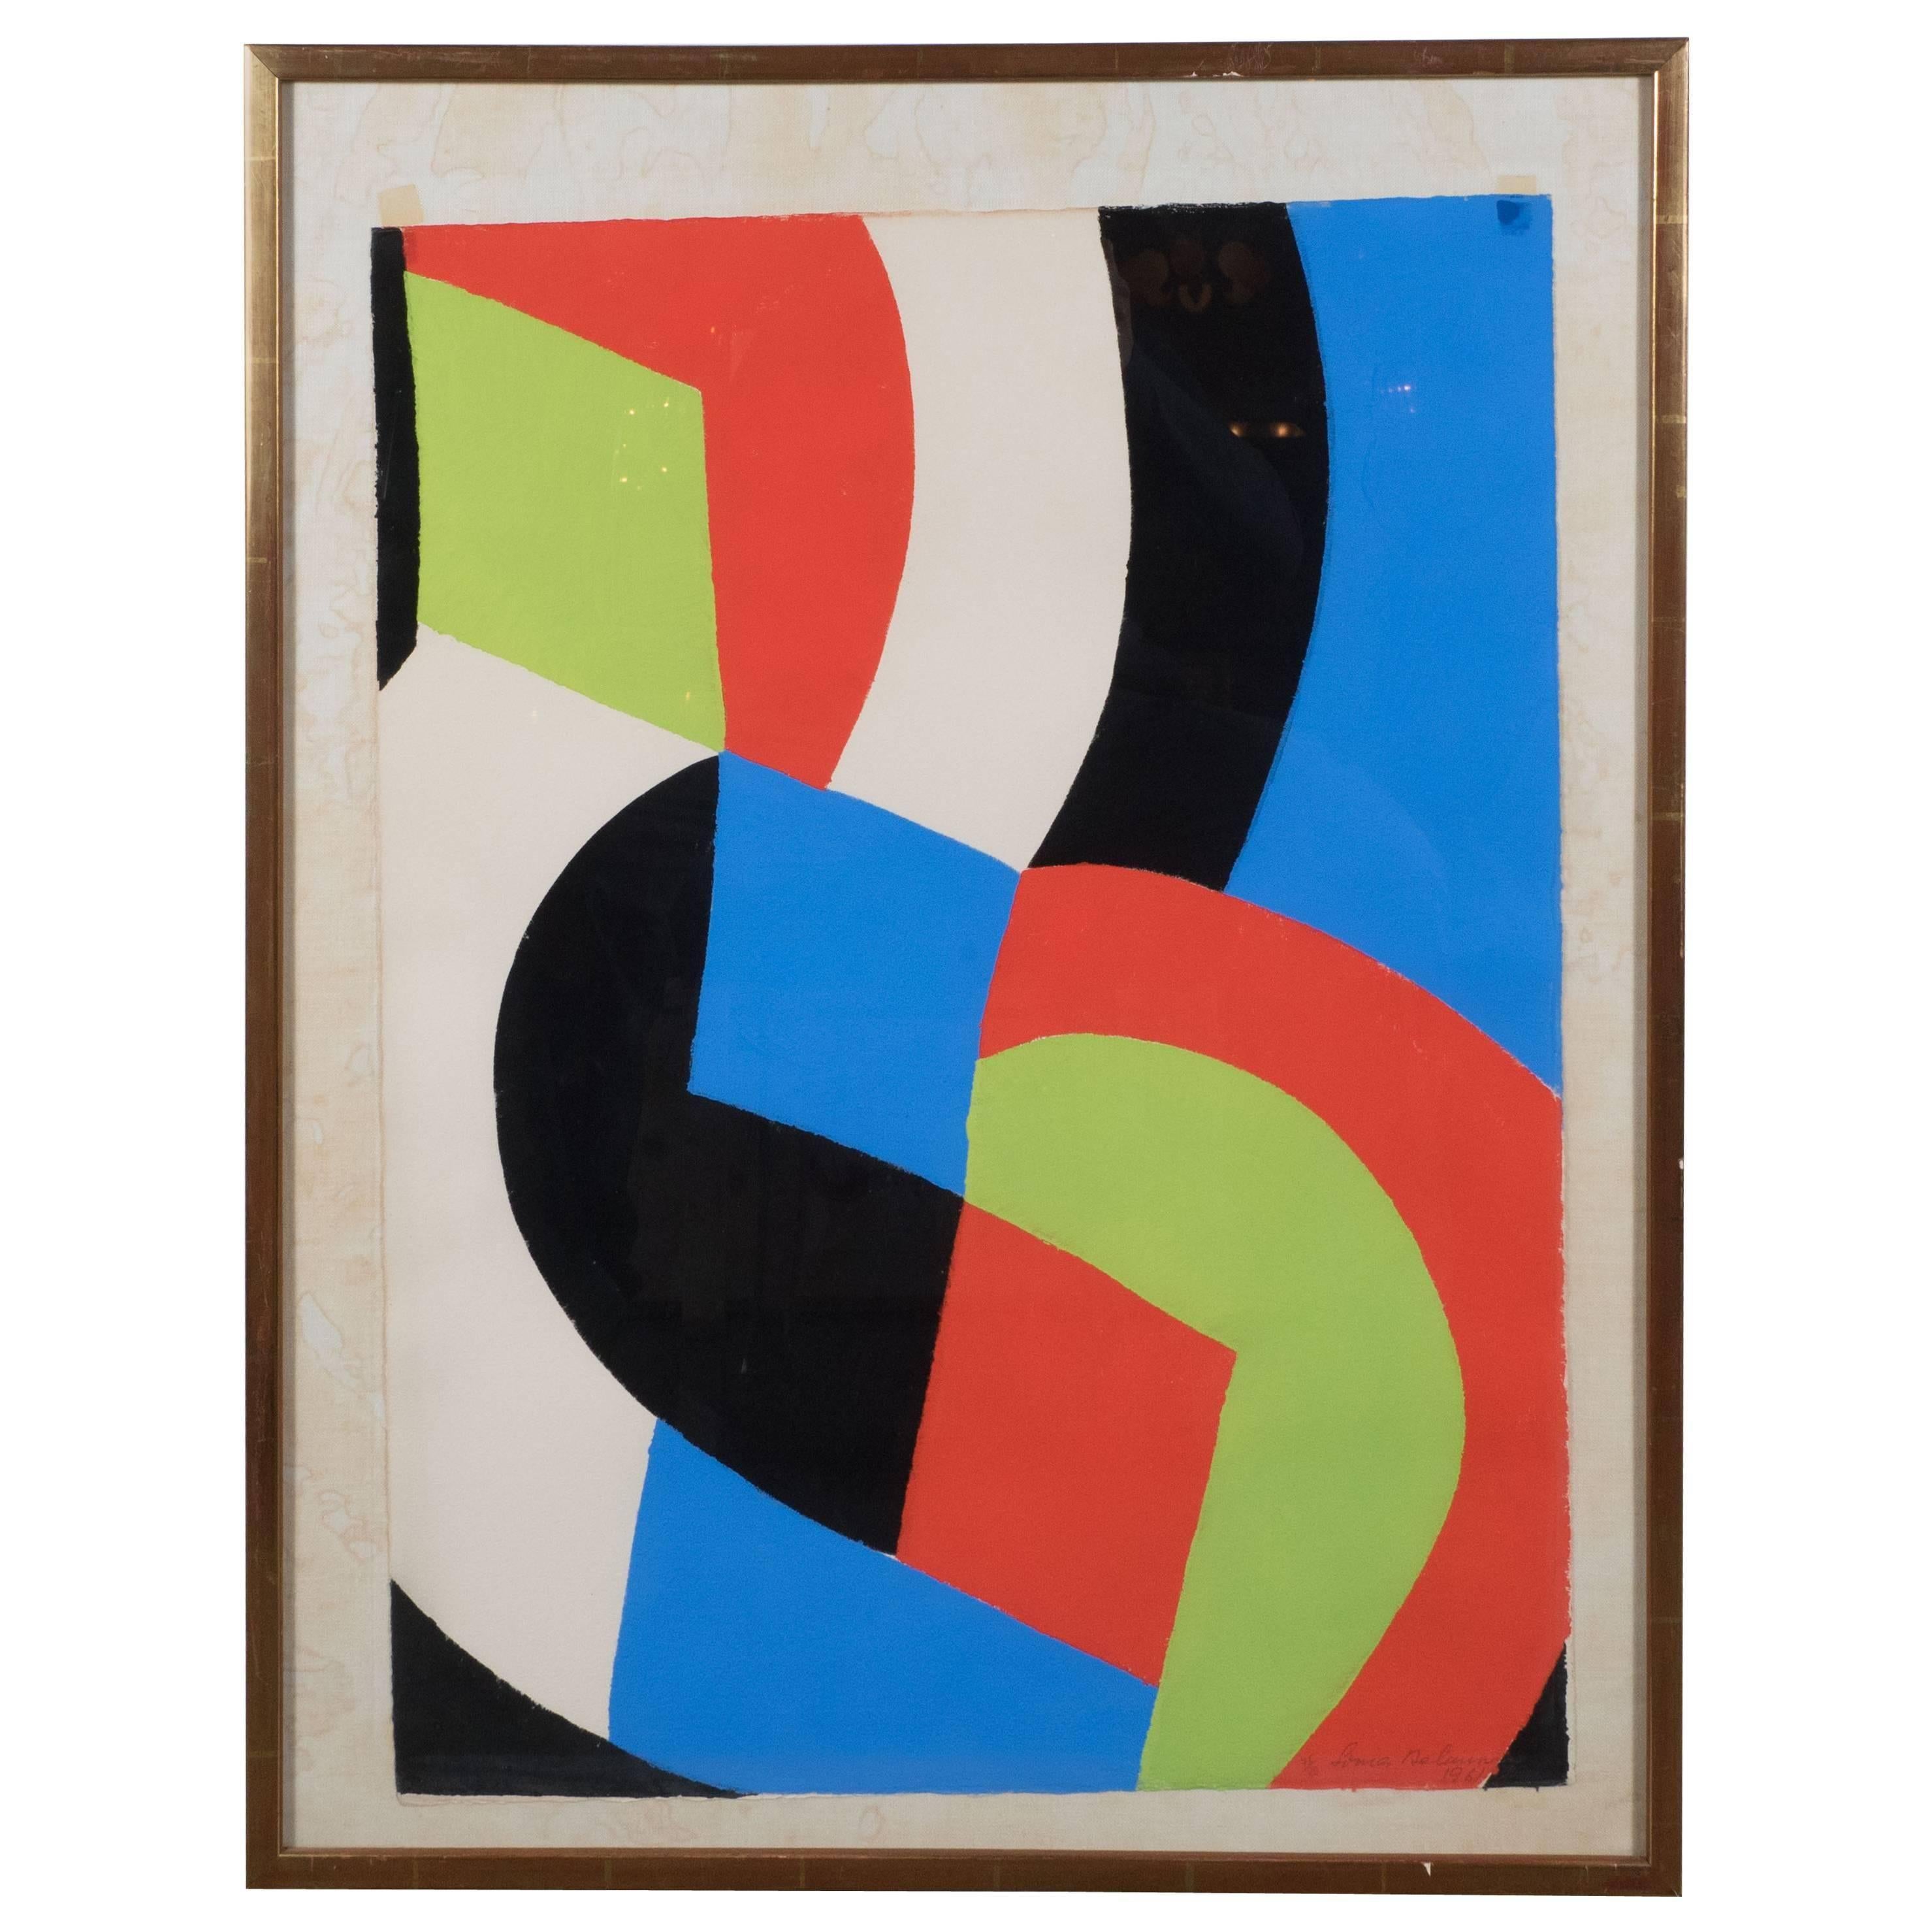 Sonia Delaunay, 
"Untitled" lithograph printed in colors, hand signed by the artist in pencil and numbered 75/80 and dated 1961. 
Measures: 25.5" H X 19.5" W, the sheet.
30" H X 24" W including the Art 
in a gilt-wood frame.

An intriguing abstract